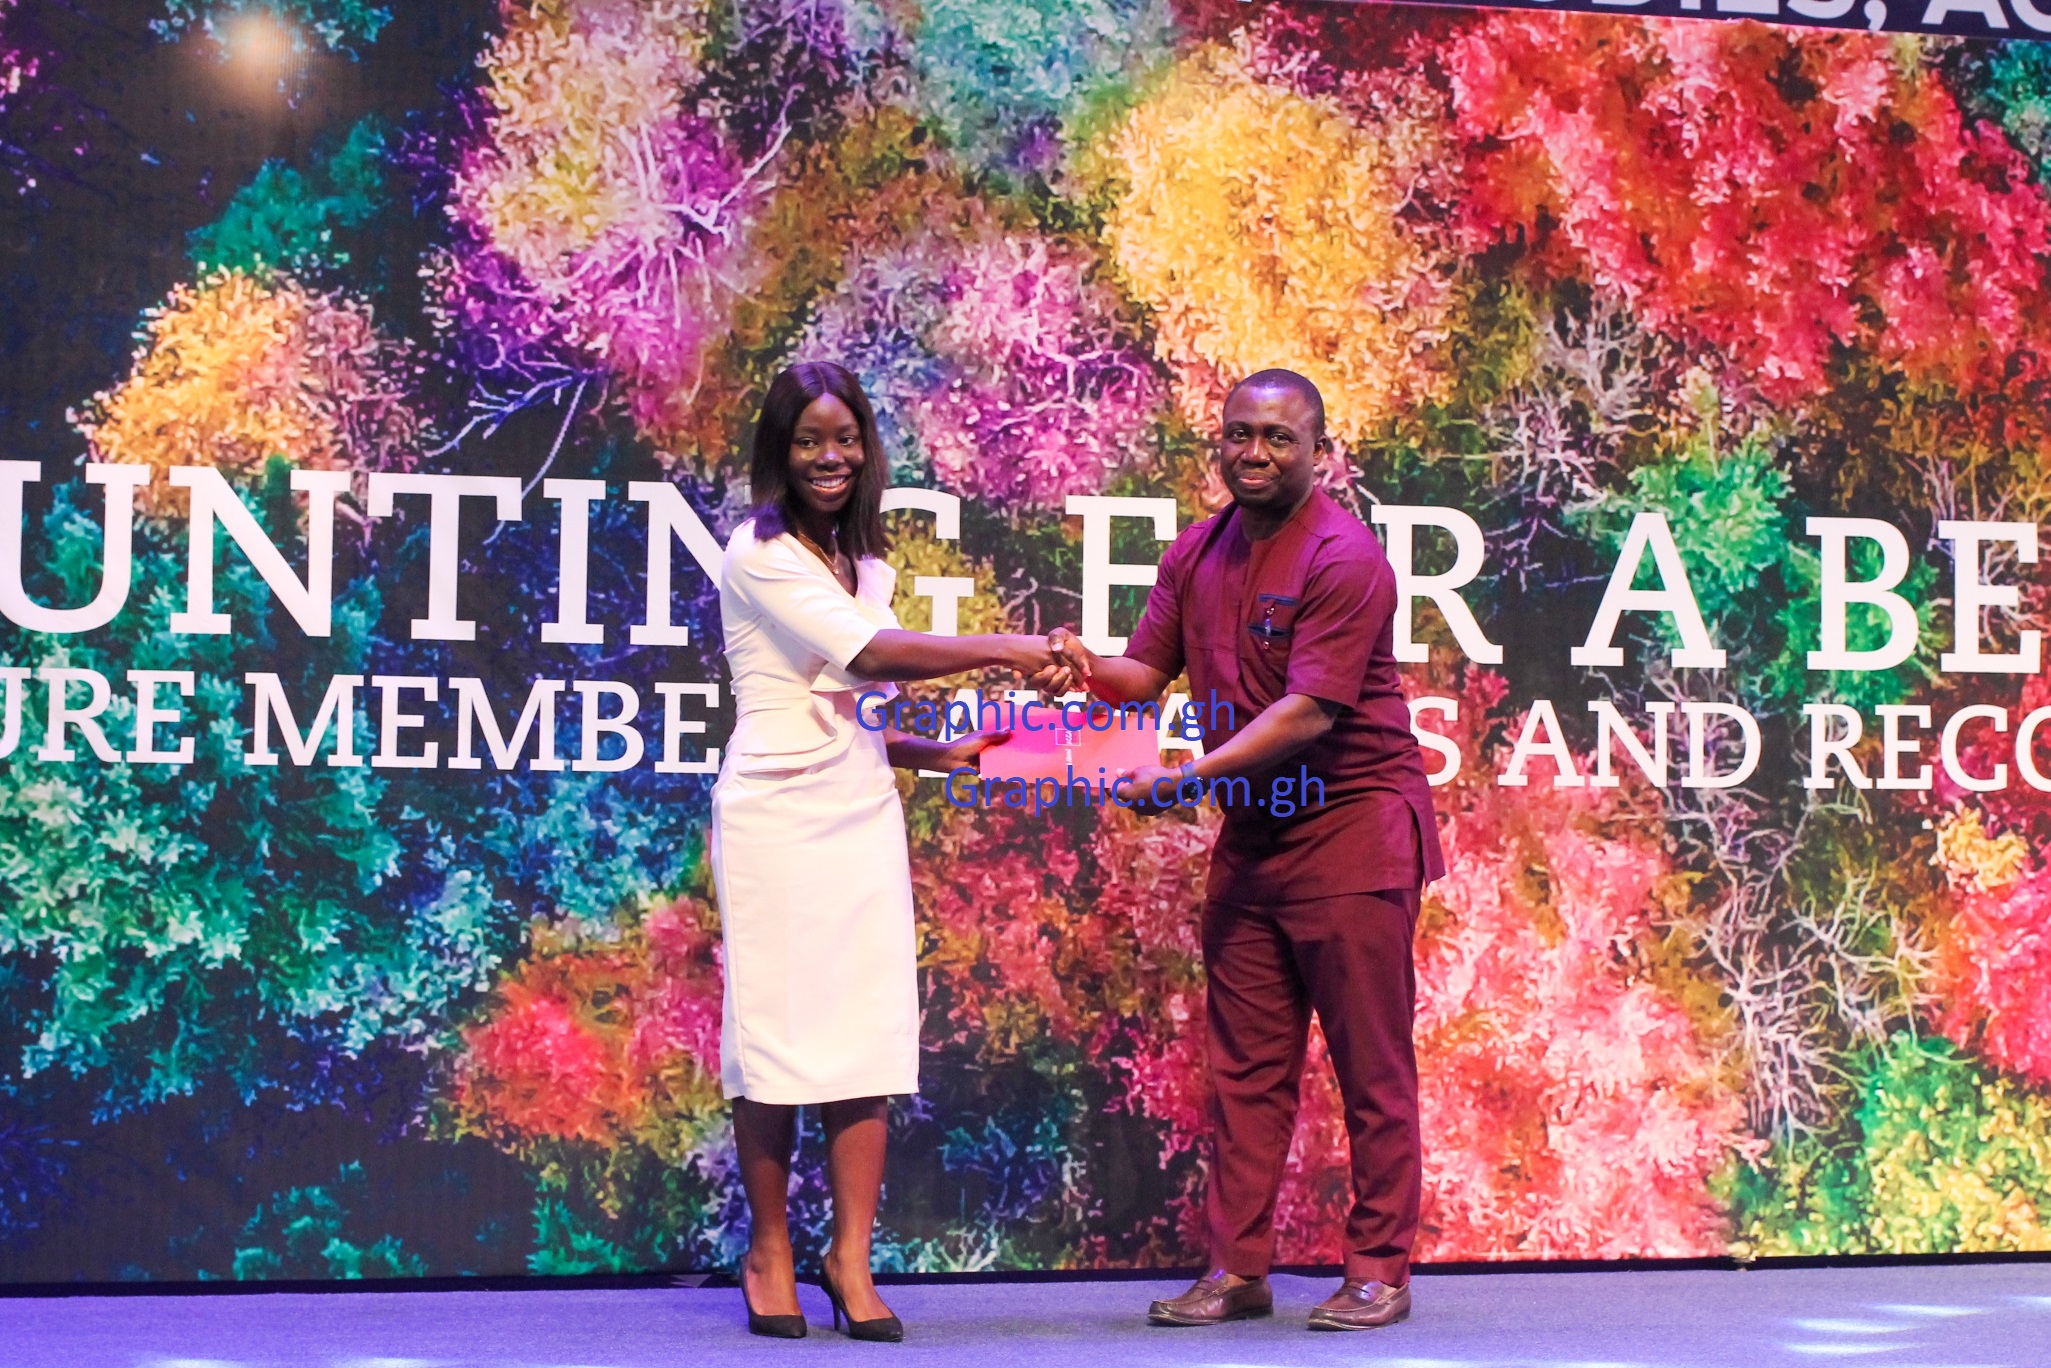  Nana Adwoa Oduraa Asomaning-Agyei receiving one of her awards from Abeeku Gyan Quansah, a Partner at PwC Ghana, during the ACCA Future Members Awards and Recognition 2022. Picture: Maxwell Ocloo